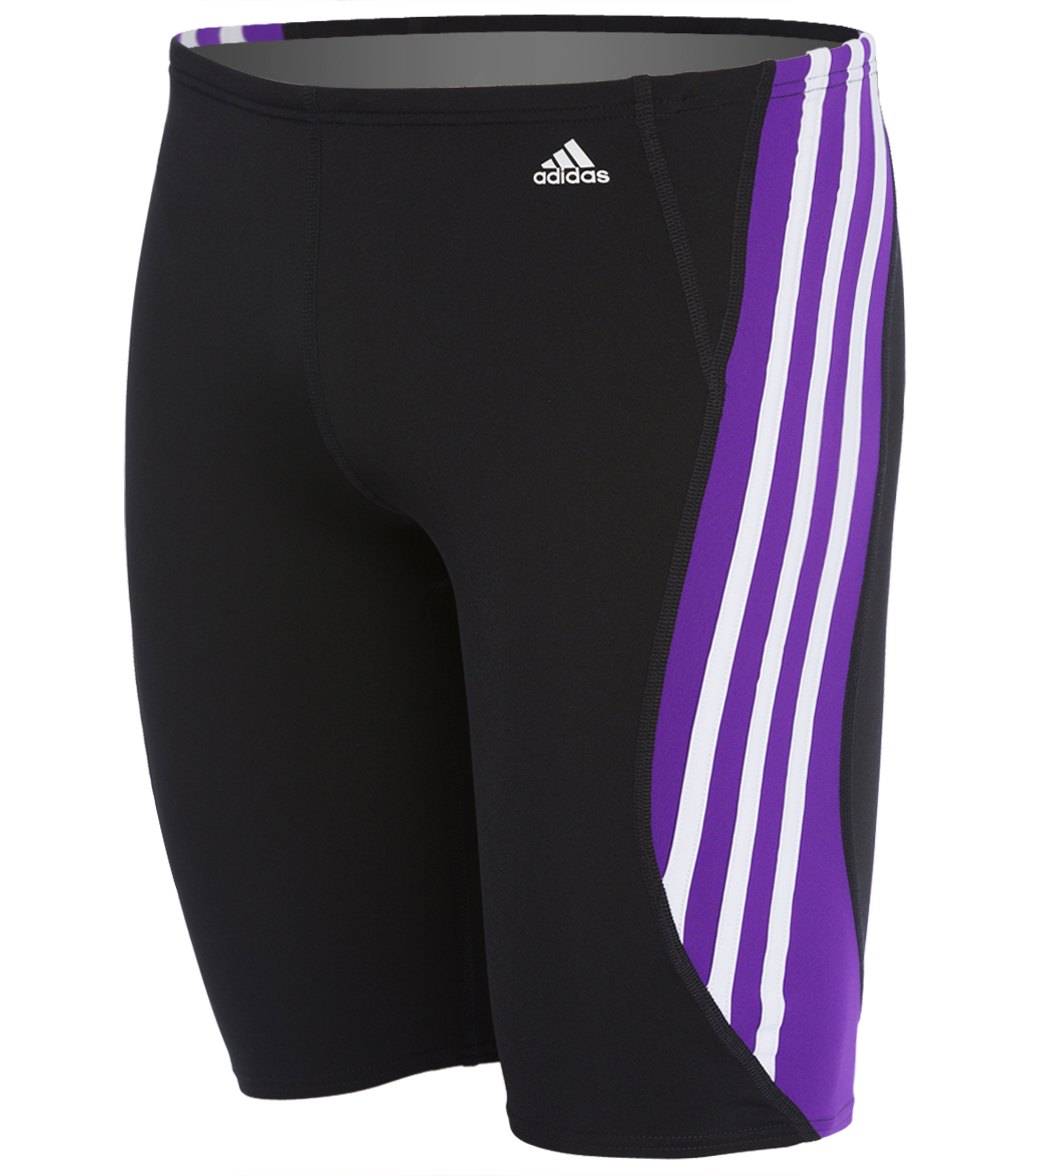 Adidas Solid Splice Jammer Swimsuit at SwimOutlet.com